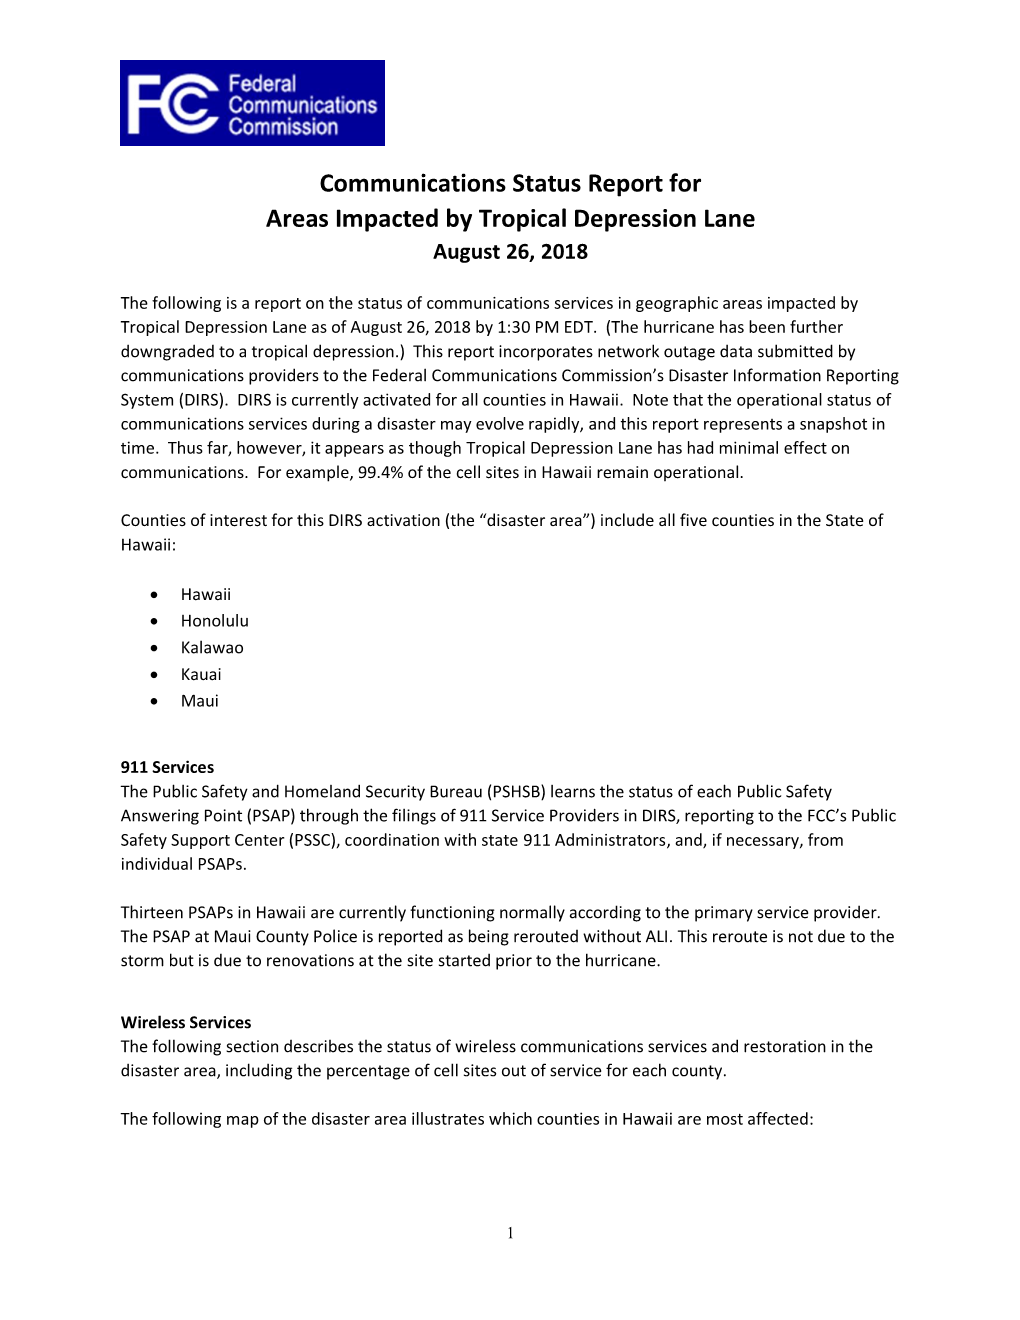 Communications Status Report for Areas Impacted by Tropical Depression Lane August 26, 2018